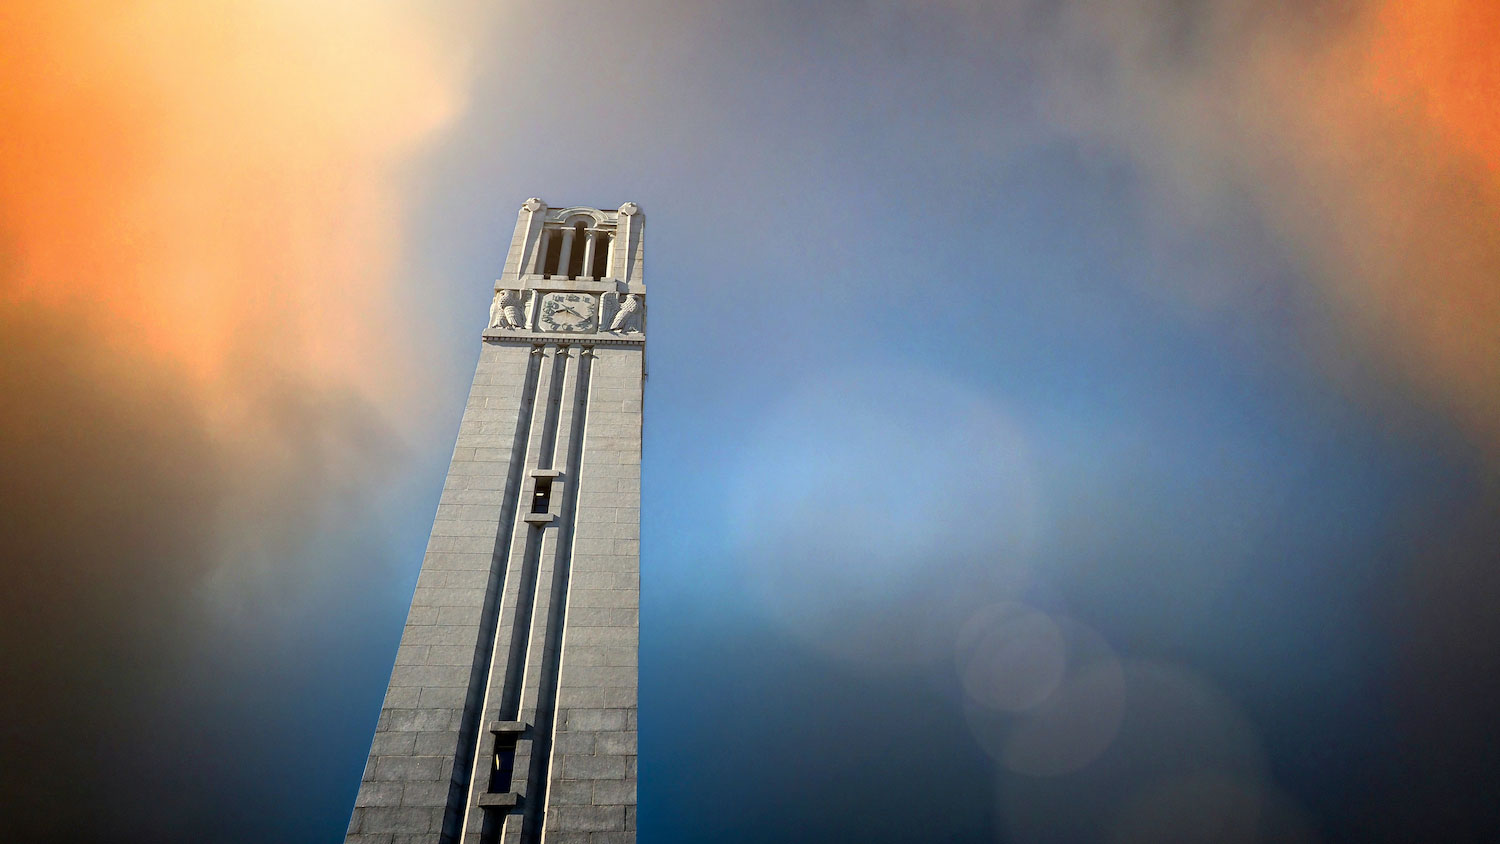 The Memorial Belltower on a cloudy day.